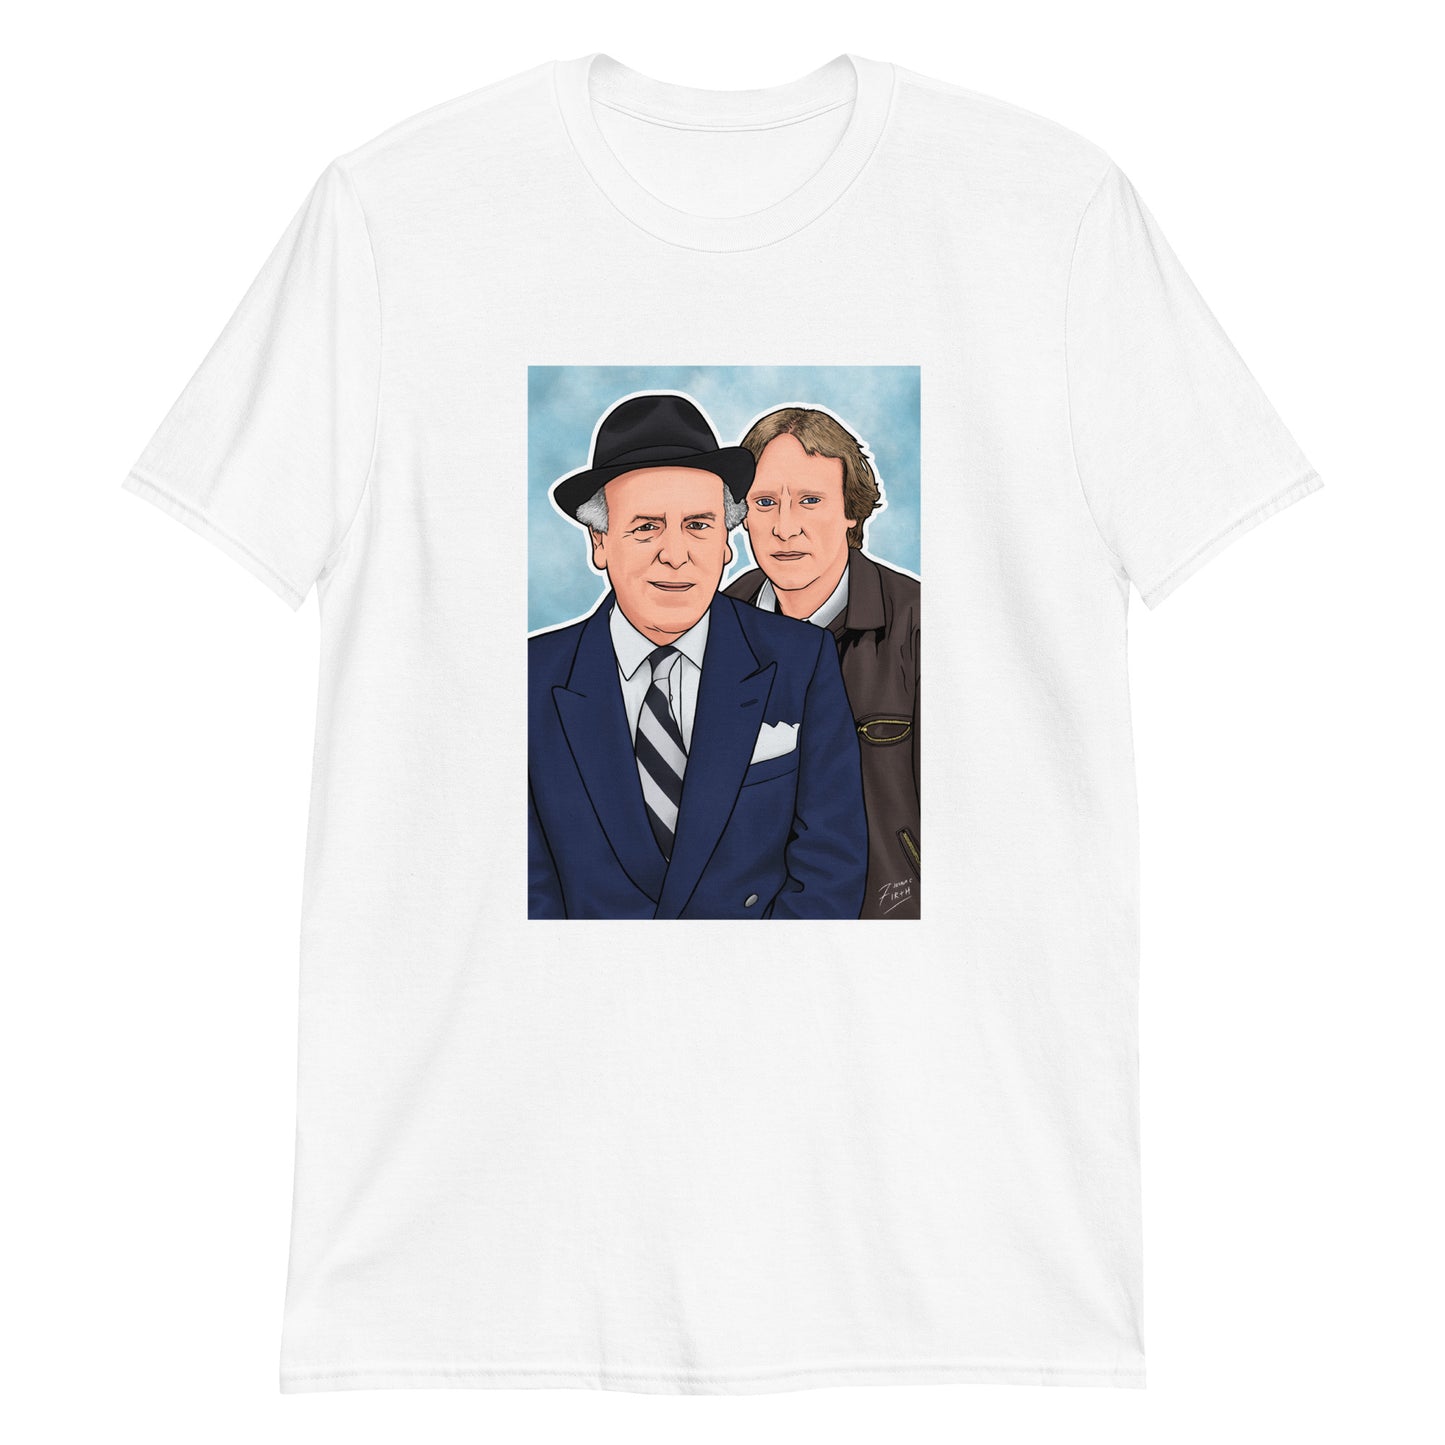 White Arthur Daley & Terry McCann, George Cole, Dennis Waterman from Minder T-Shirt 